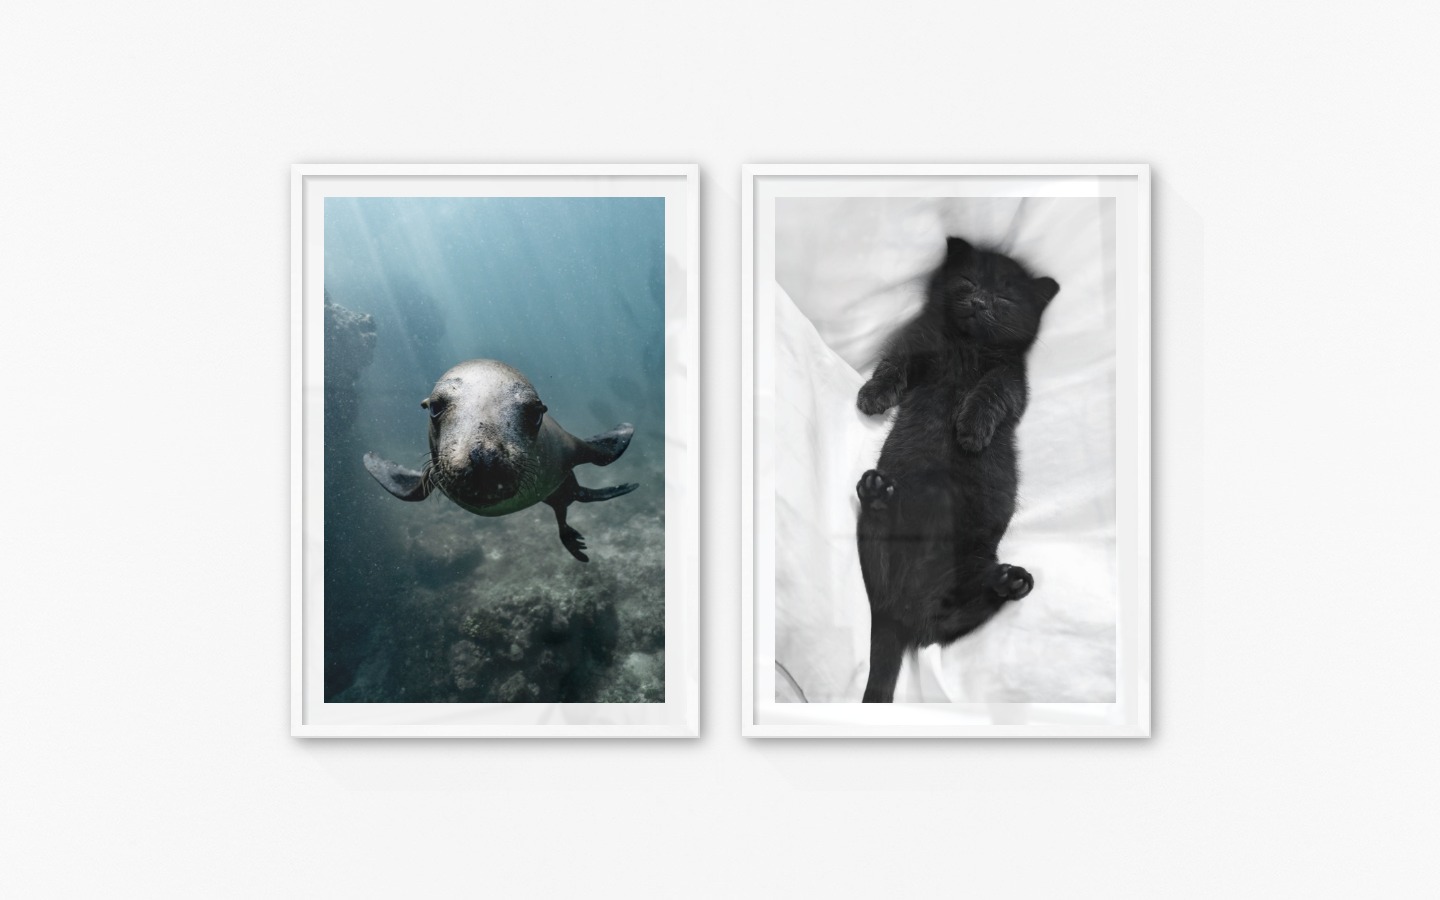 Gallery wall with picture frames in white in sizes 70x100 with prints "Seal in the water" and "Cat in bed"